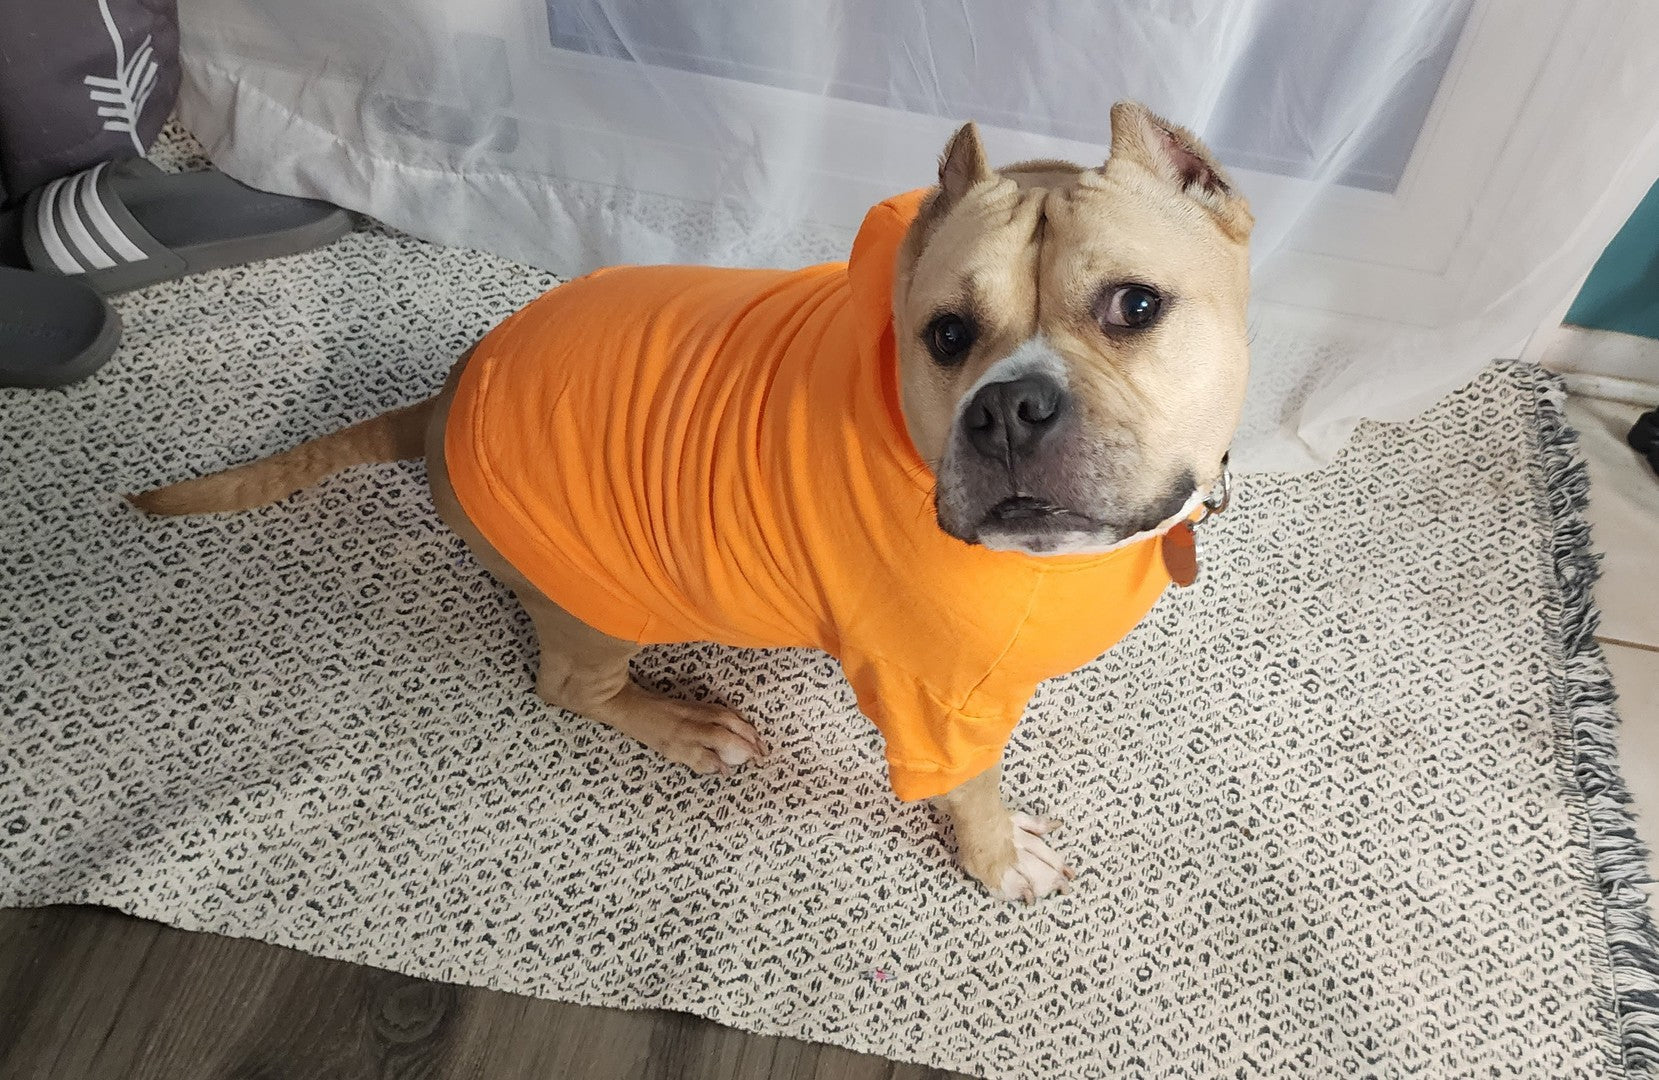 A fawn colored pit bull-type dog with cropped ears, sitting on a gray rug wearing a bright orange hoodie